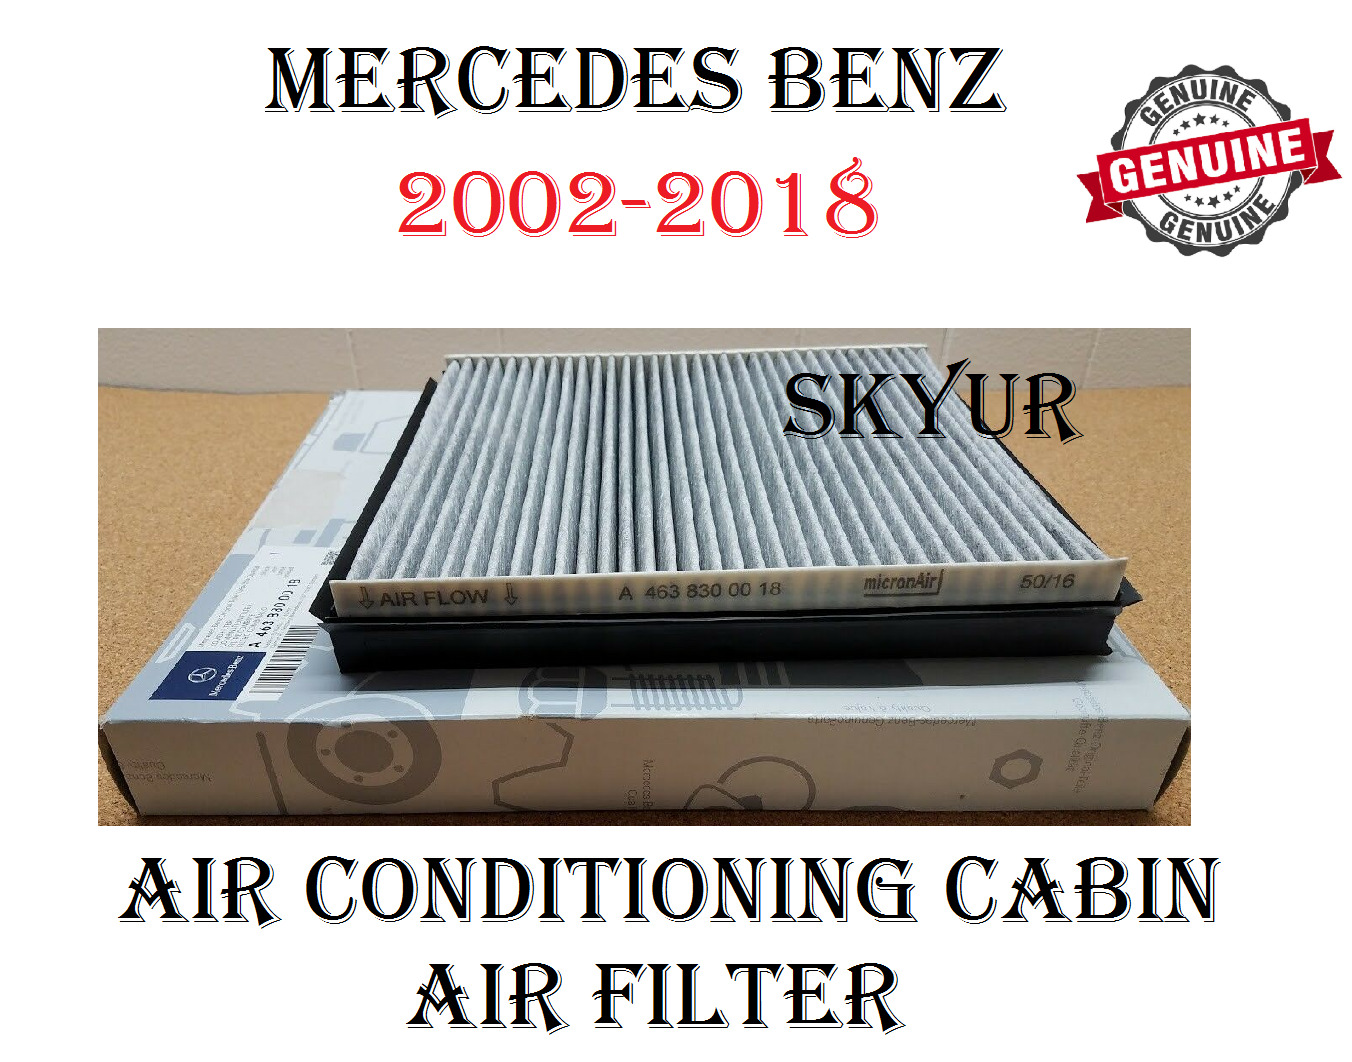 Mercedes Air Conditioning Cabin Filter For 2002-2018 G500 G63 G550 G55 GENUINE